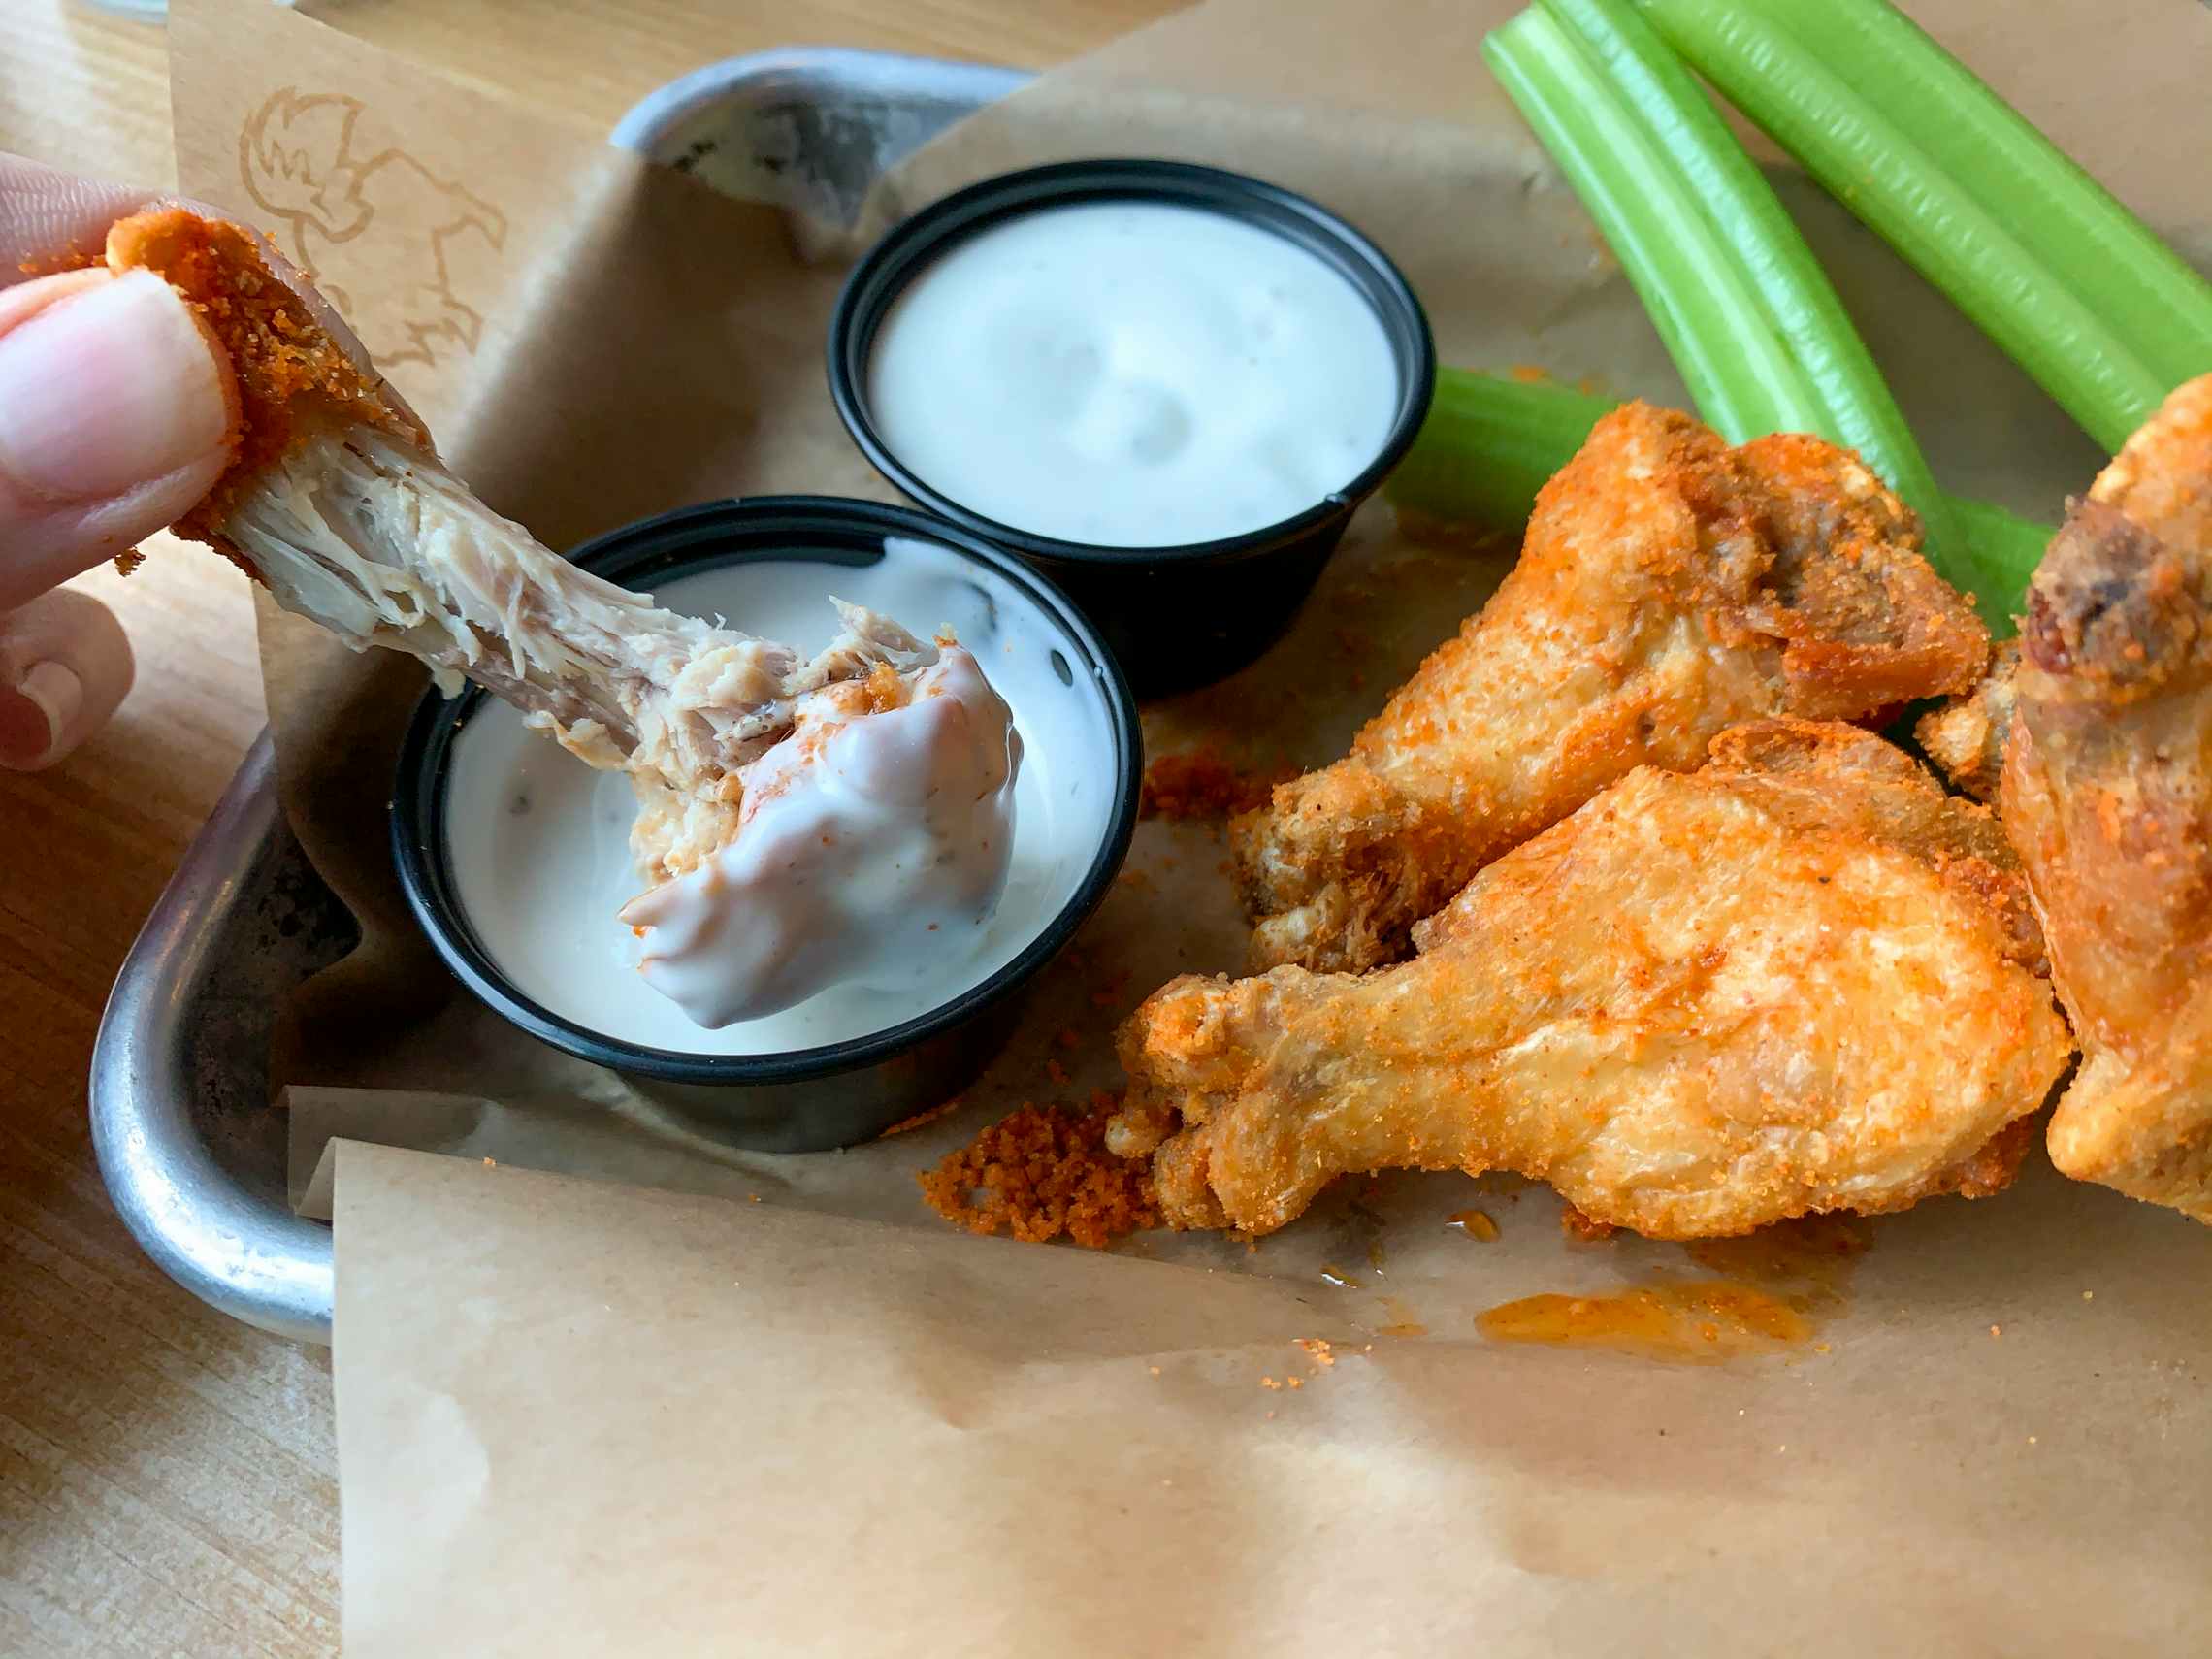 A partially eaten dry rub seasoned traditional buffalo wings being dipped into a ranch dip cup. To the right is a second dip cup, three more wings, and some celery.